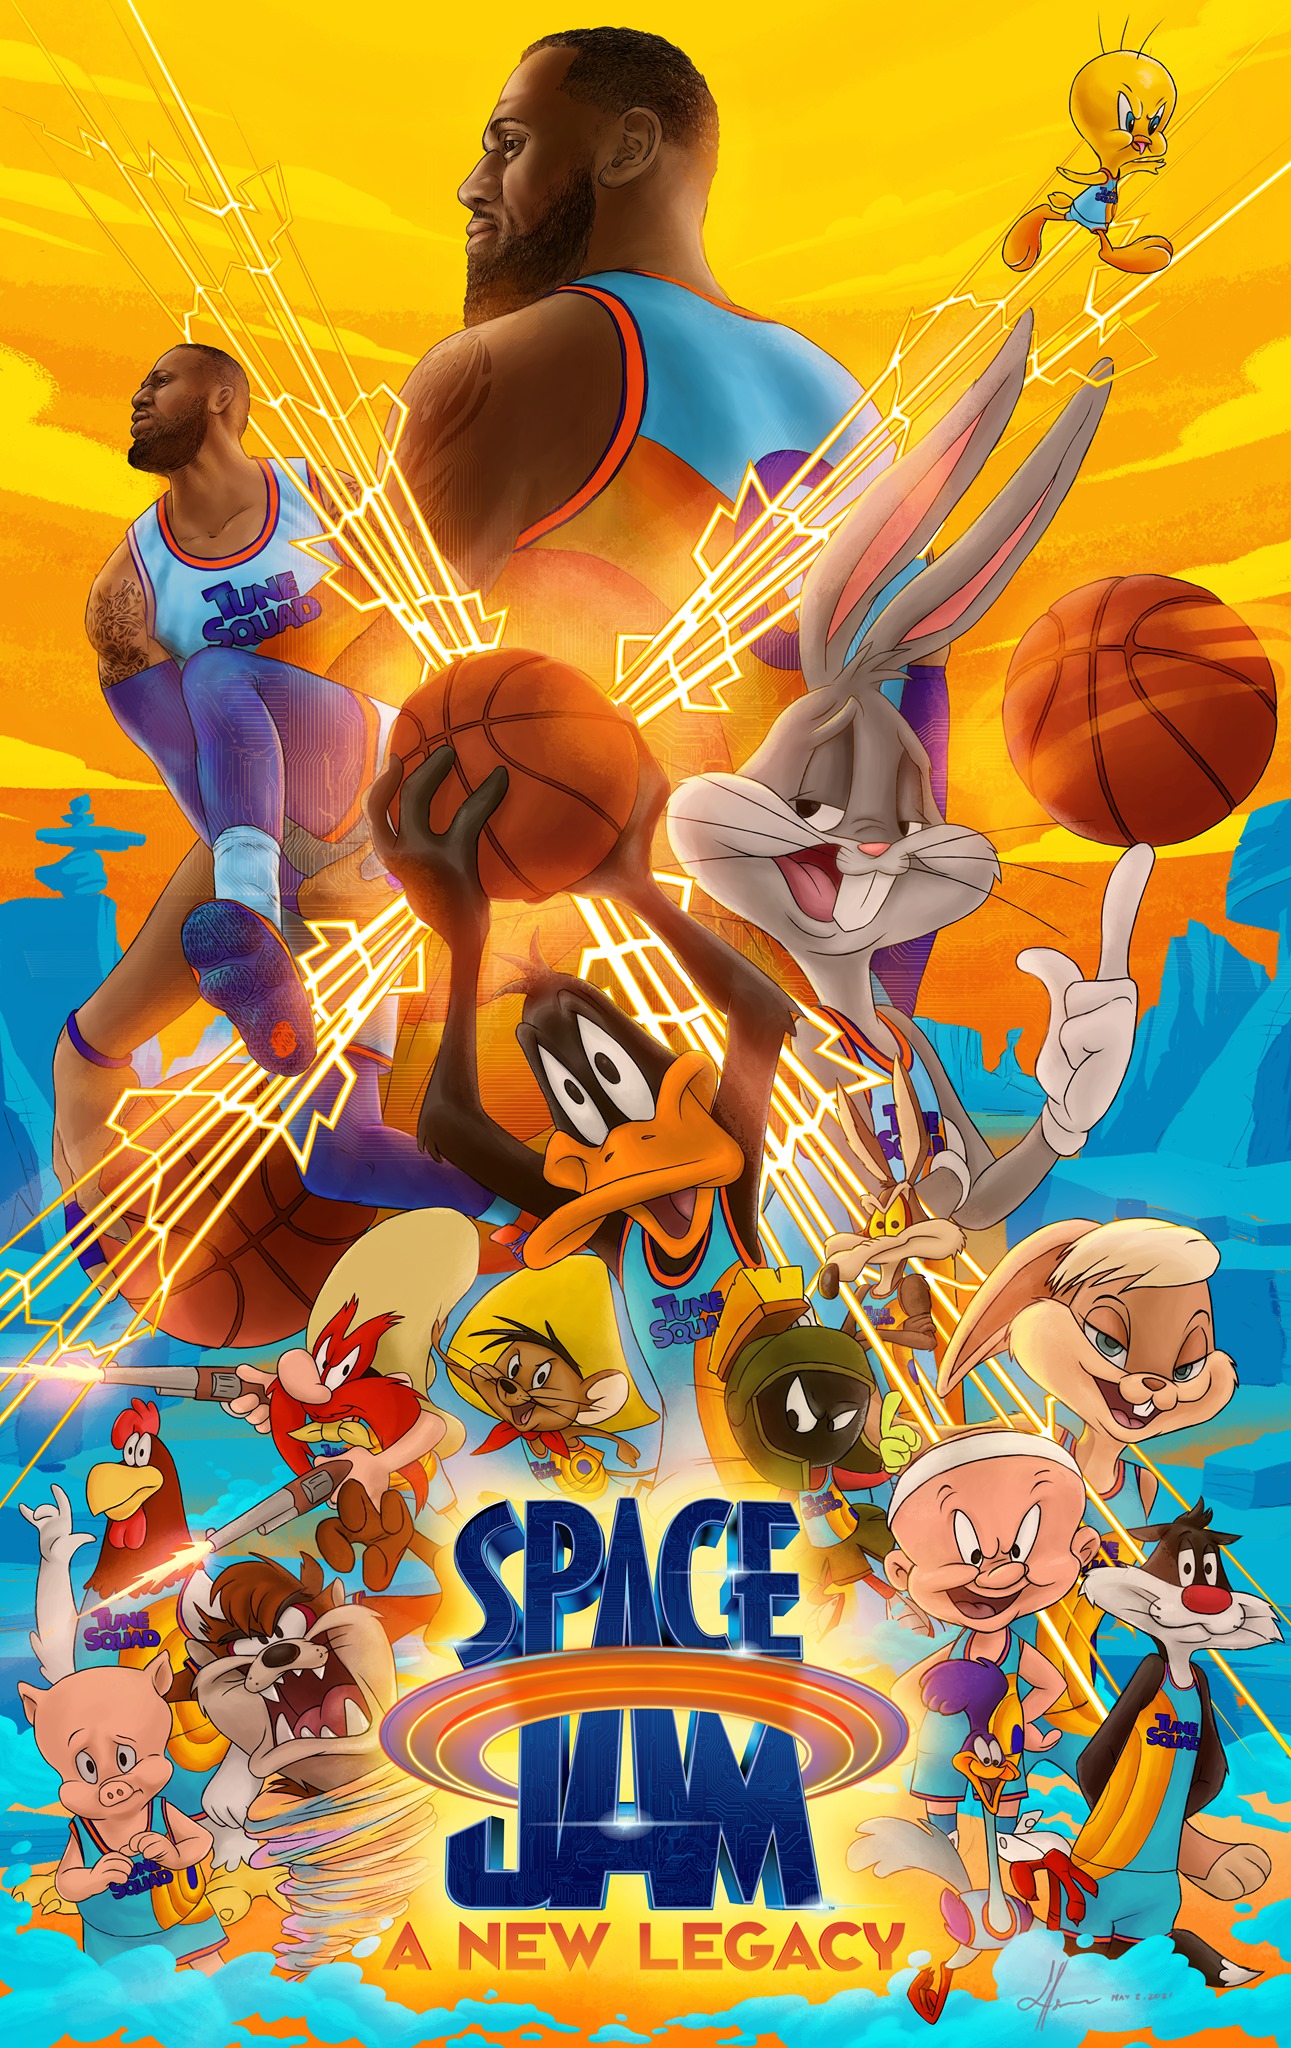 Space Jam A New Legacy Gallery - Jam Looney Bugs Rappler Assets2 Squad